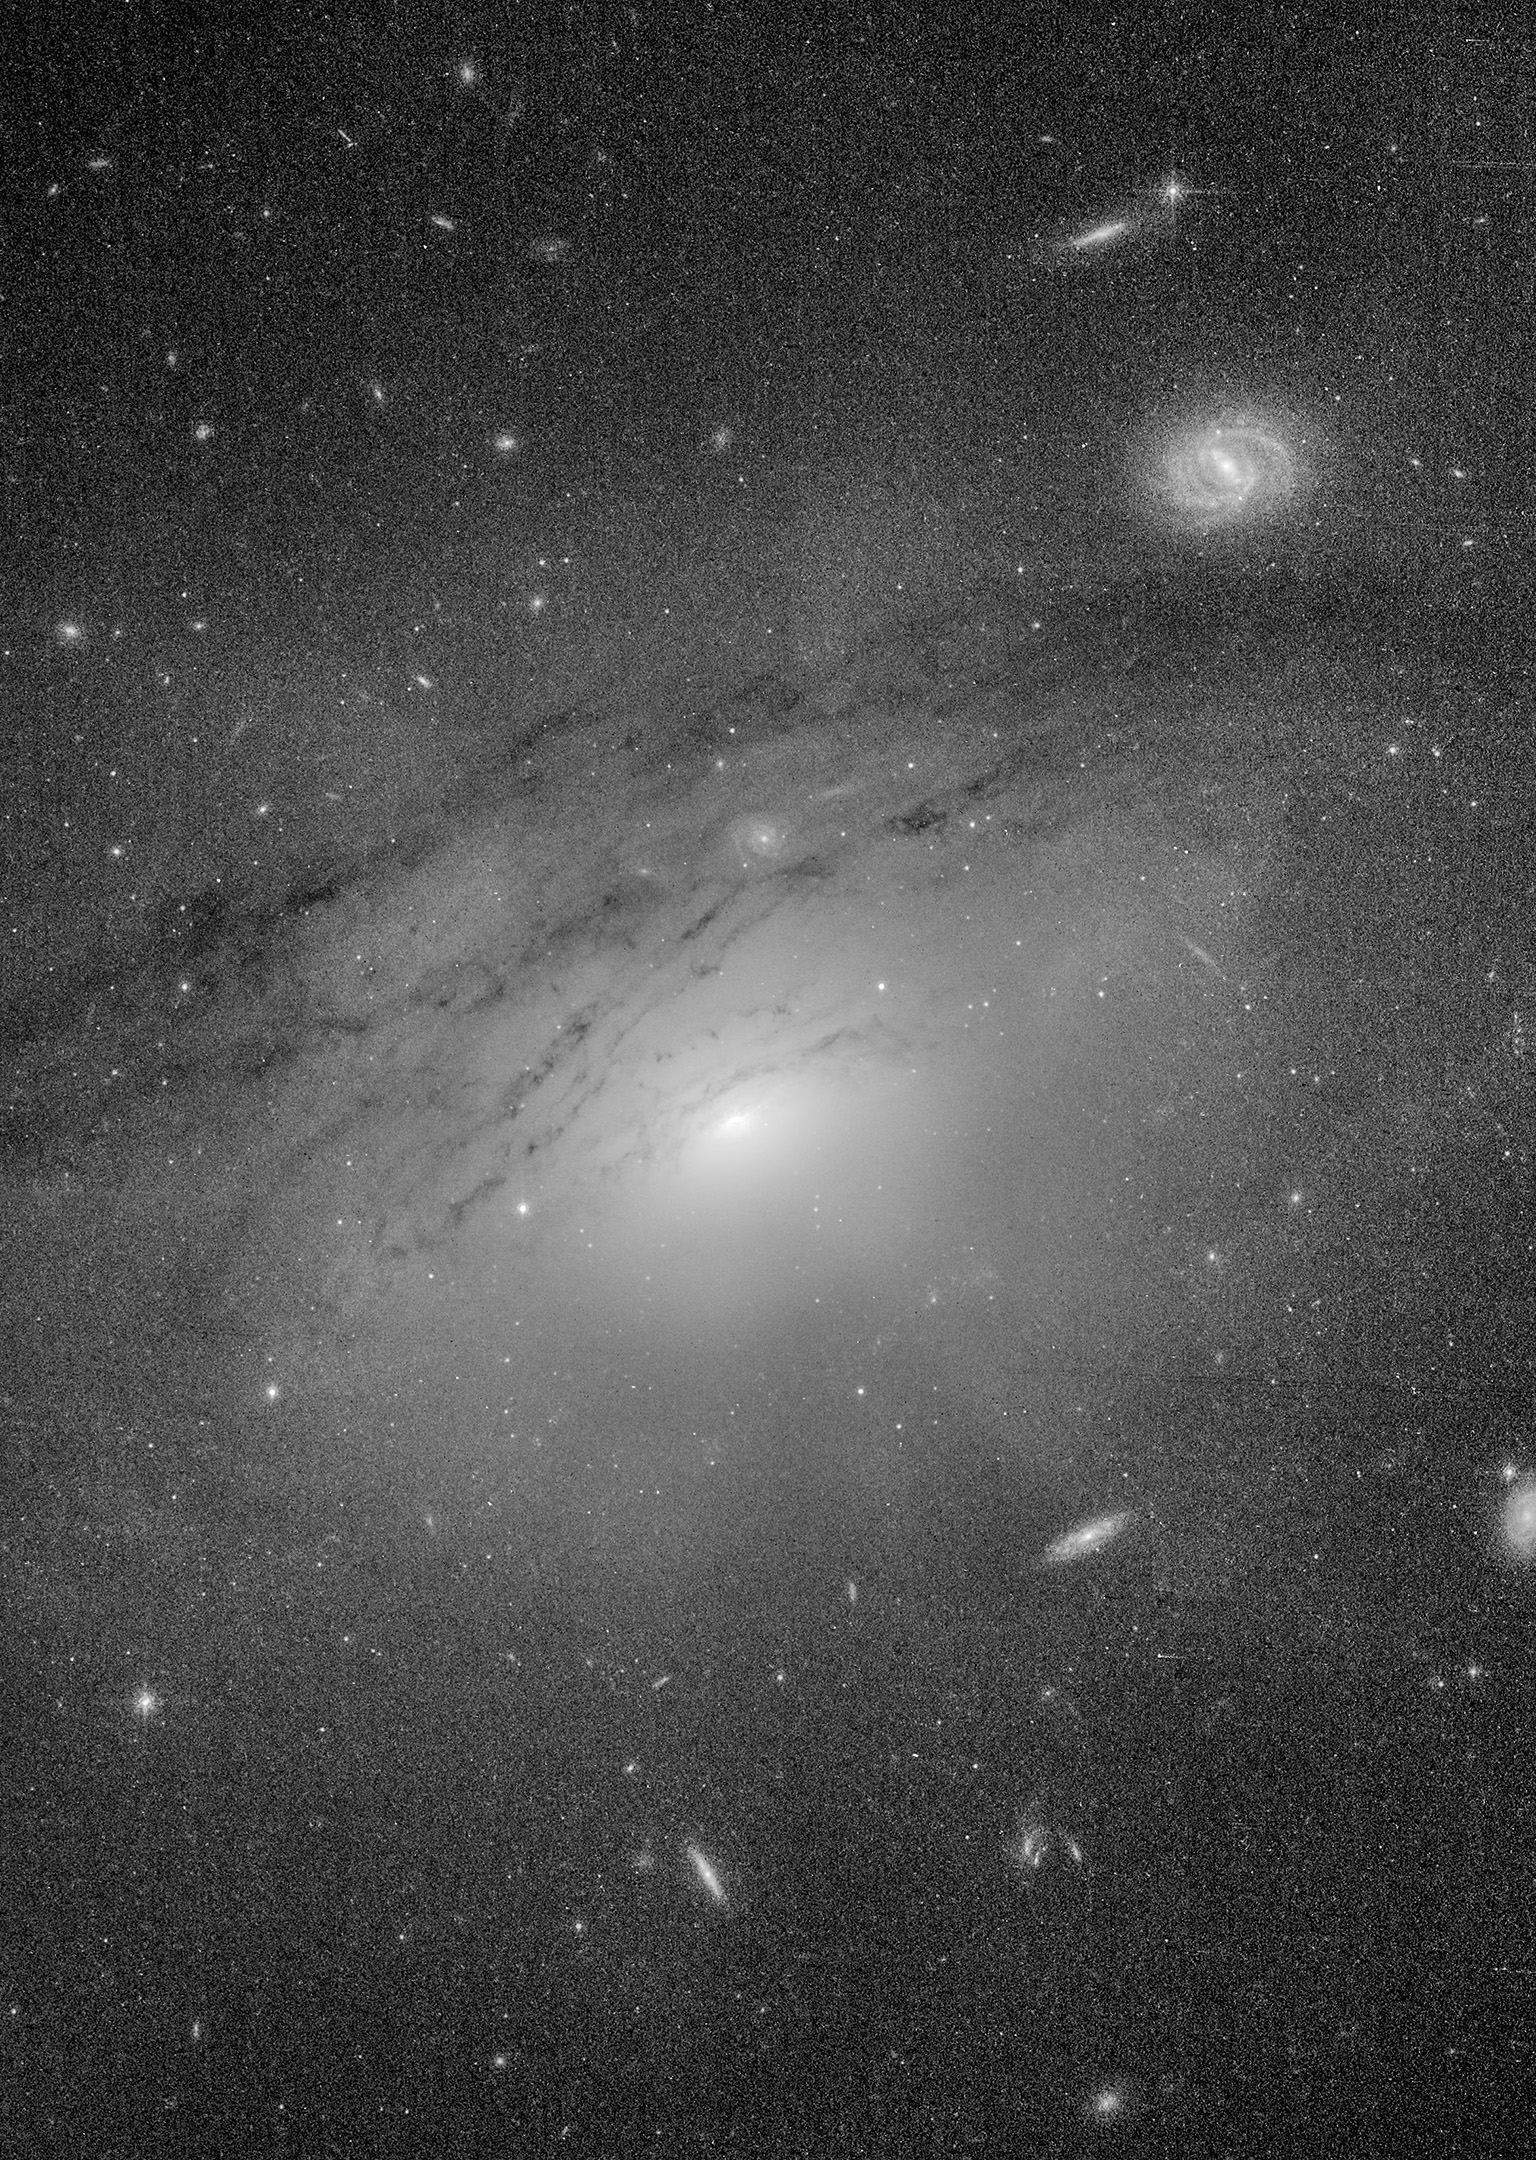 Judy Schmidt, an image processing expert and citizen scientist, enhanced this image of IC 5063--a Seyfert galaxy with an active galactic nuclei--from Barth's Prop15444, to reveal deep shadows, or rays, seeming to emanate from the galaxy; in this image, the dark rays can be seen near the top and bottom of the galaxy.